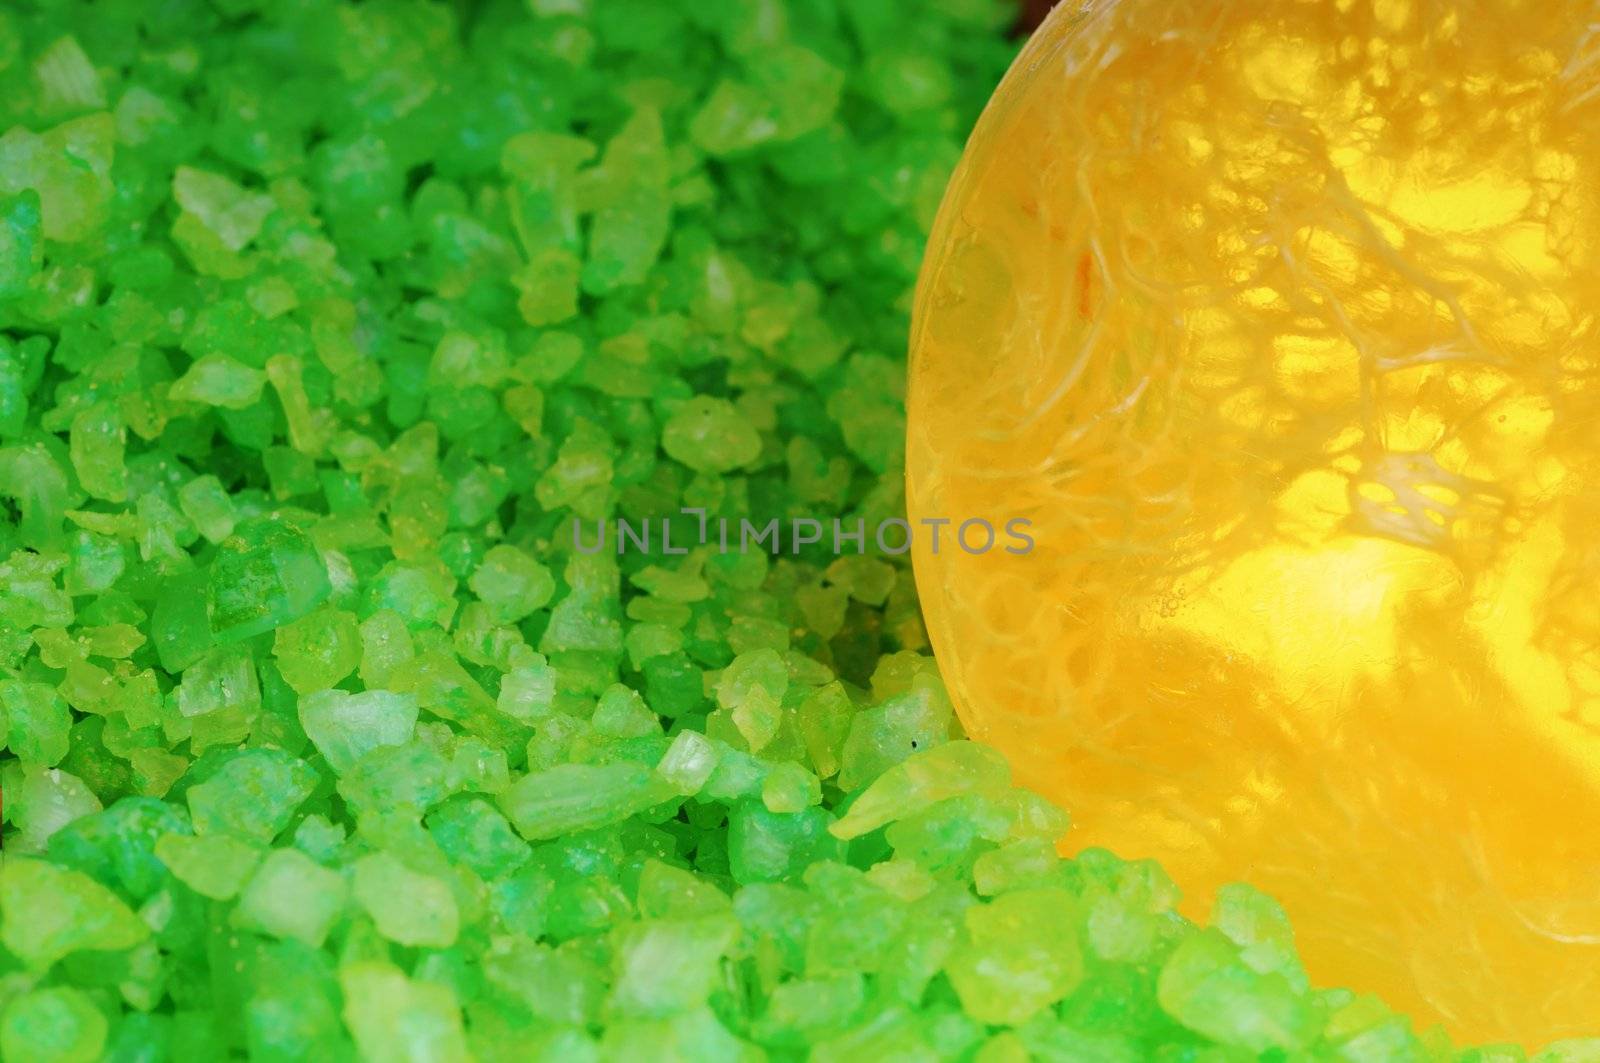 Green salt in transparent and scrubing soap. Focus on soap. Shallow DoF.